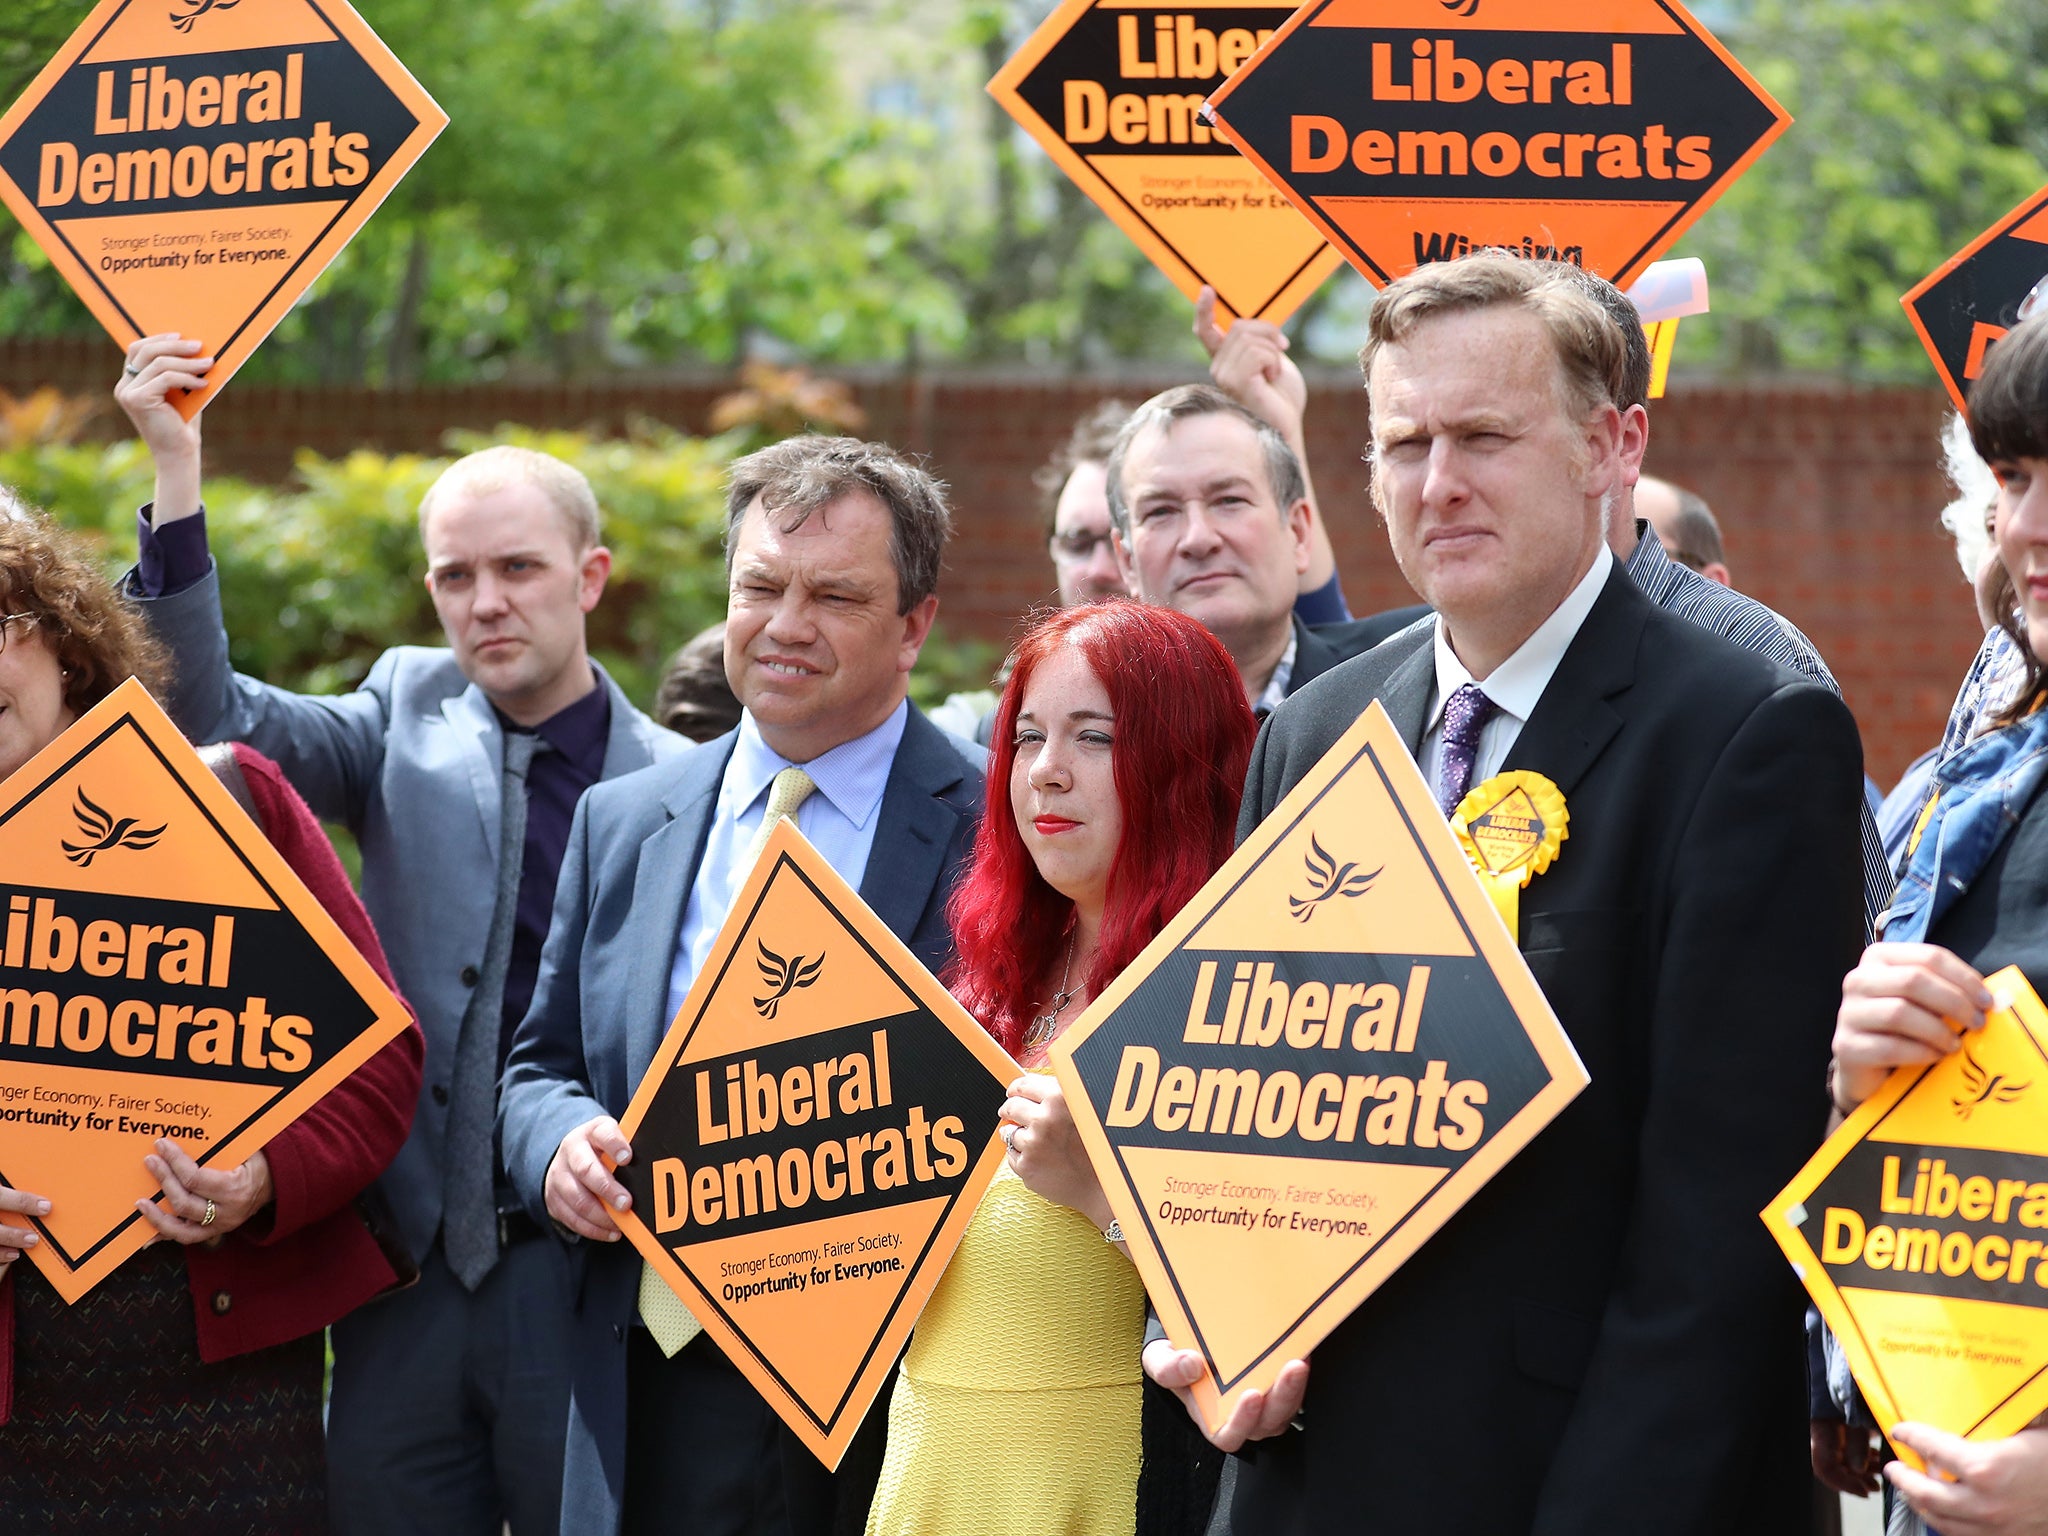 The Lib Dems are releasing their manifesto, promising to tackle Theresa May's Brexit plans